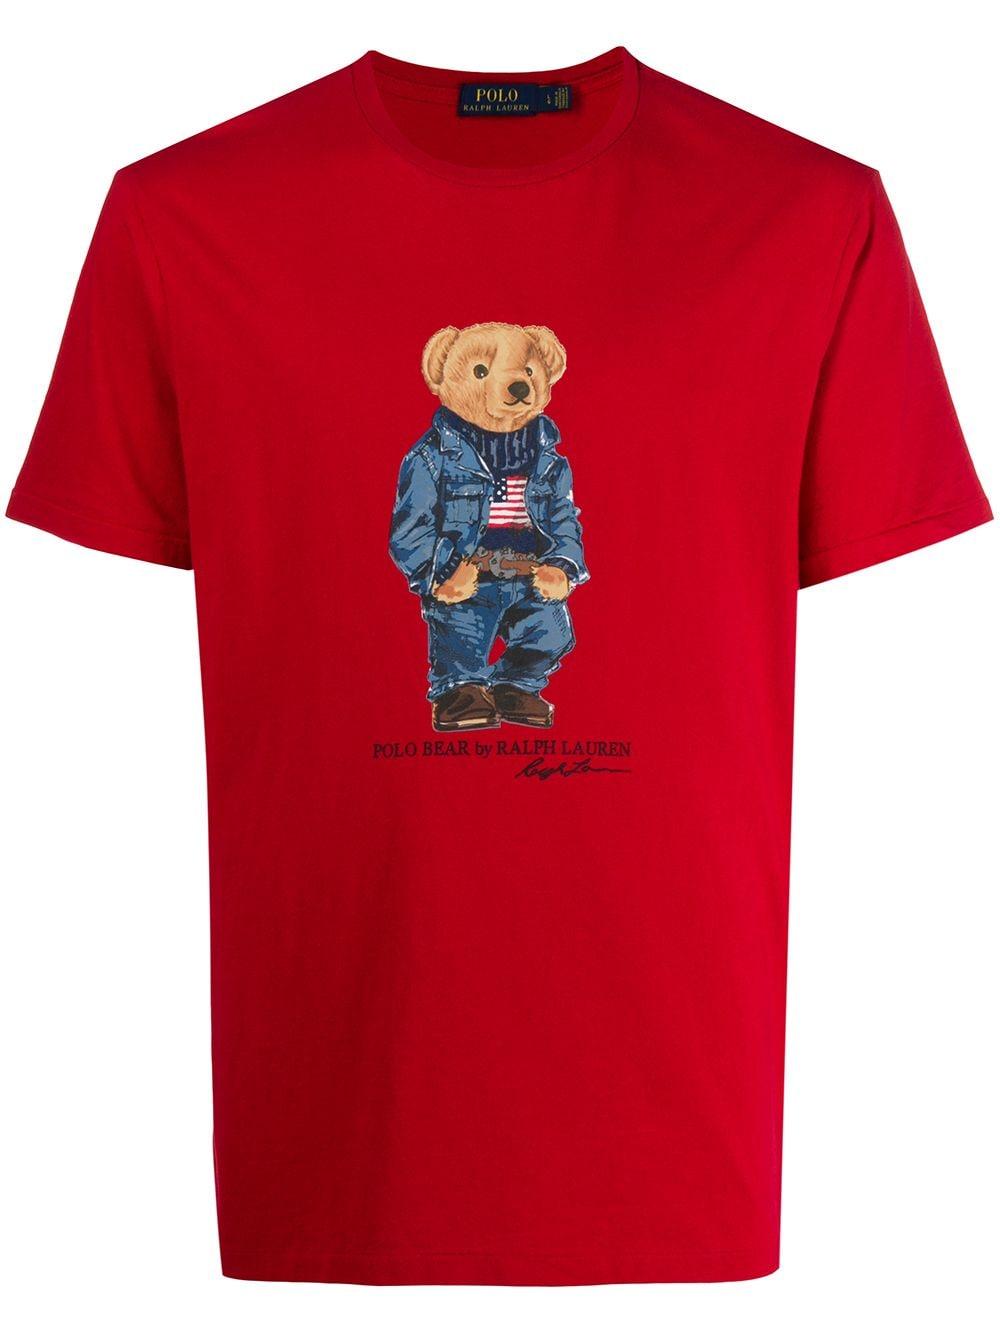 Polo Ralph Lauren Cotton Polo Bear T-shirt in Red for Men - Lyst